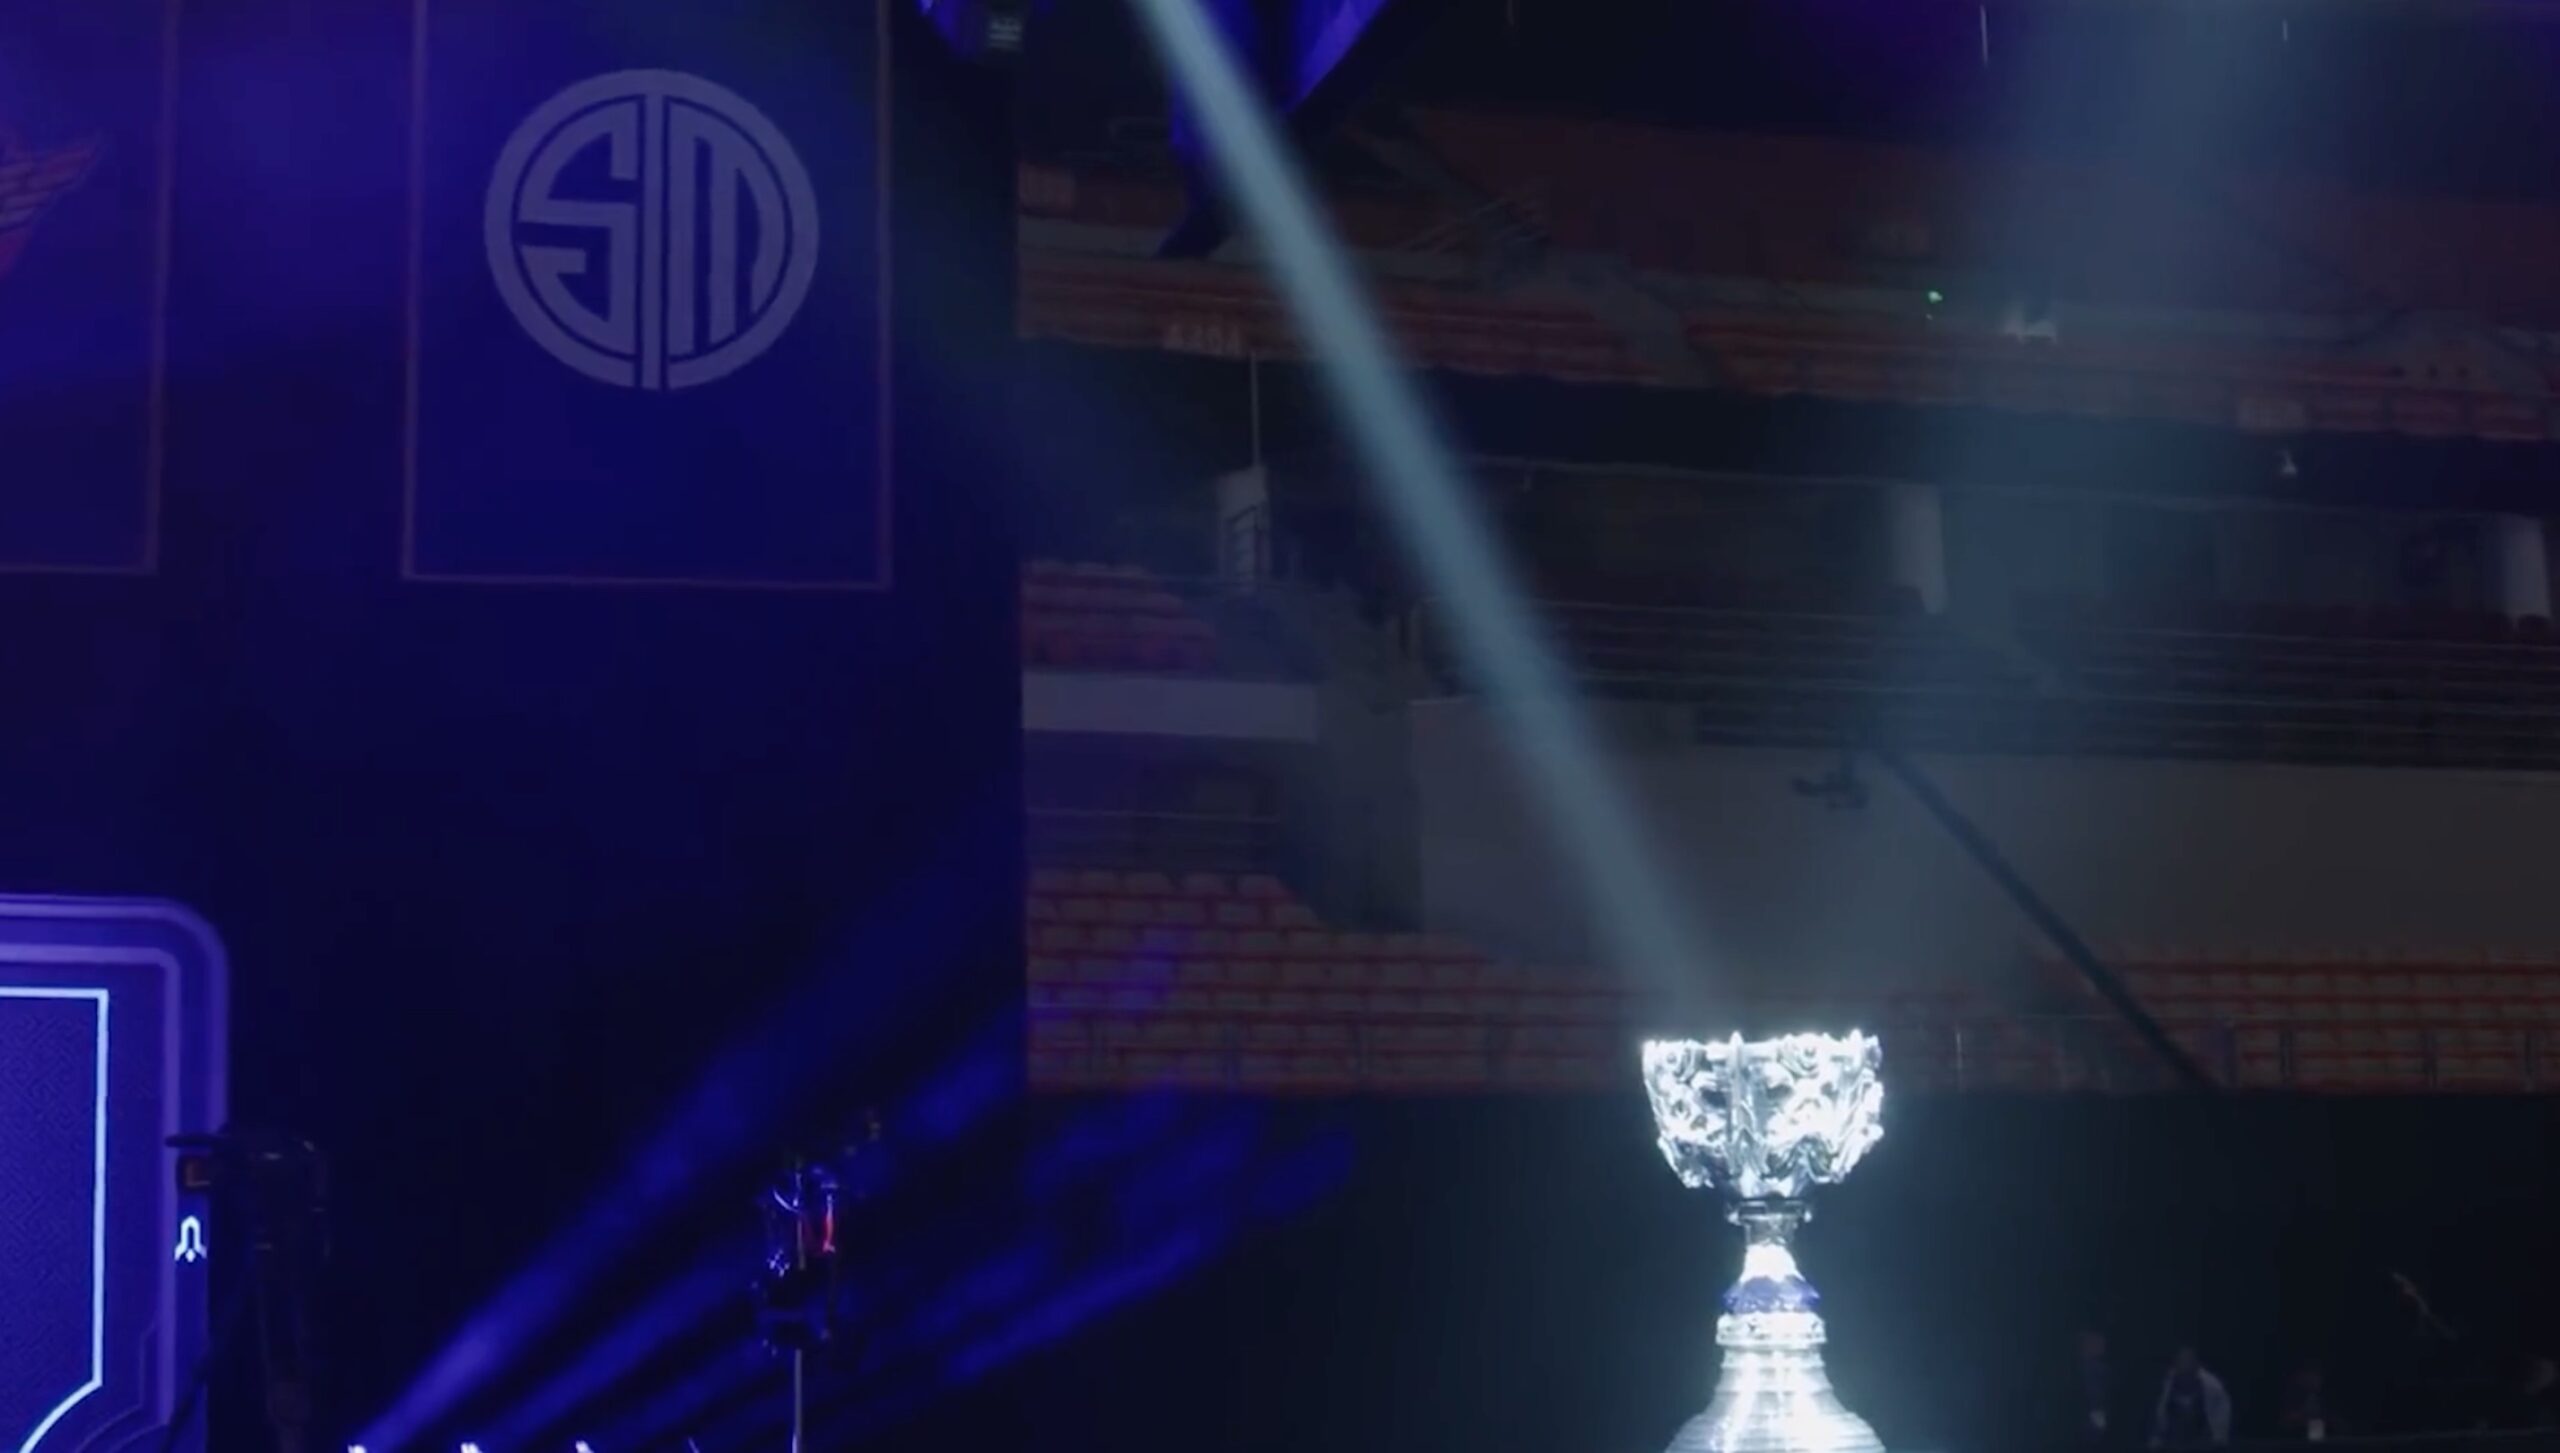 05/25/23 TSM looks to sell LCS slot; China approves Microsoft-ATVI; FaZe cuts 40% of workforce